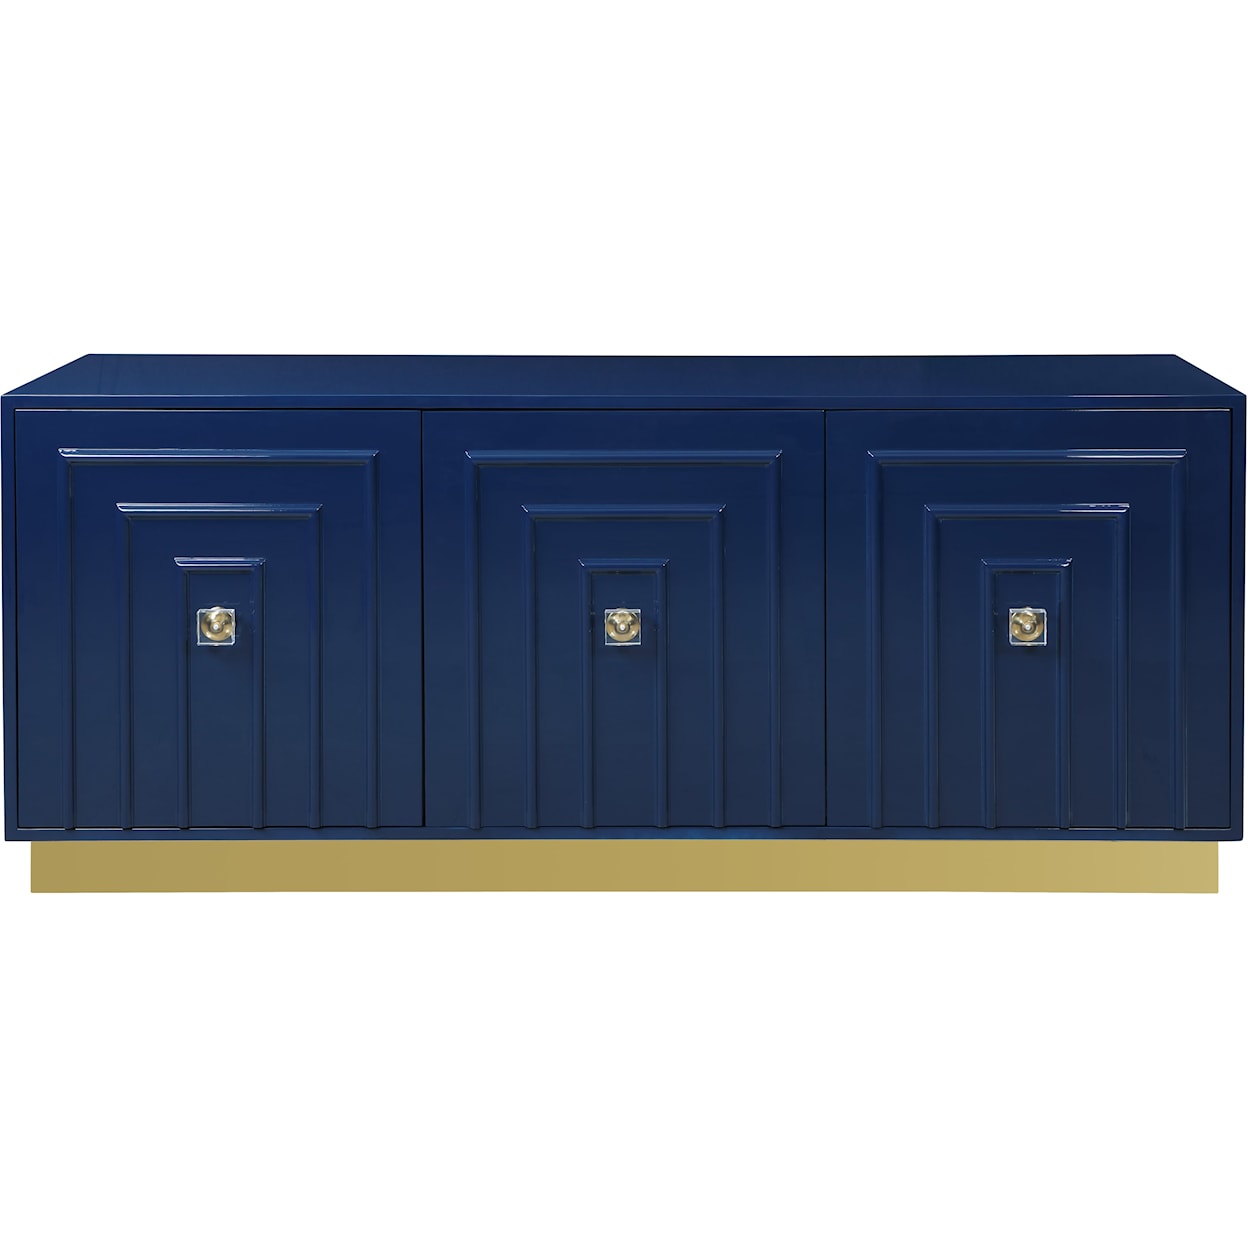 Meridian Furniture Cosmopolitan Navy Lacquer Sideboard with Gold Base